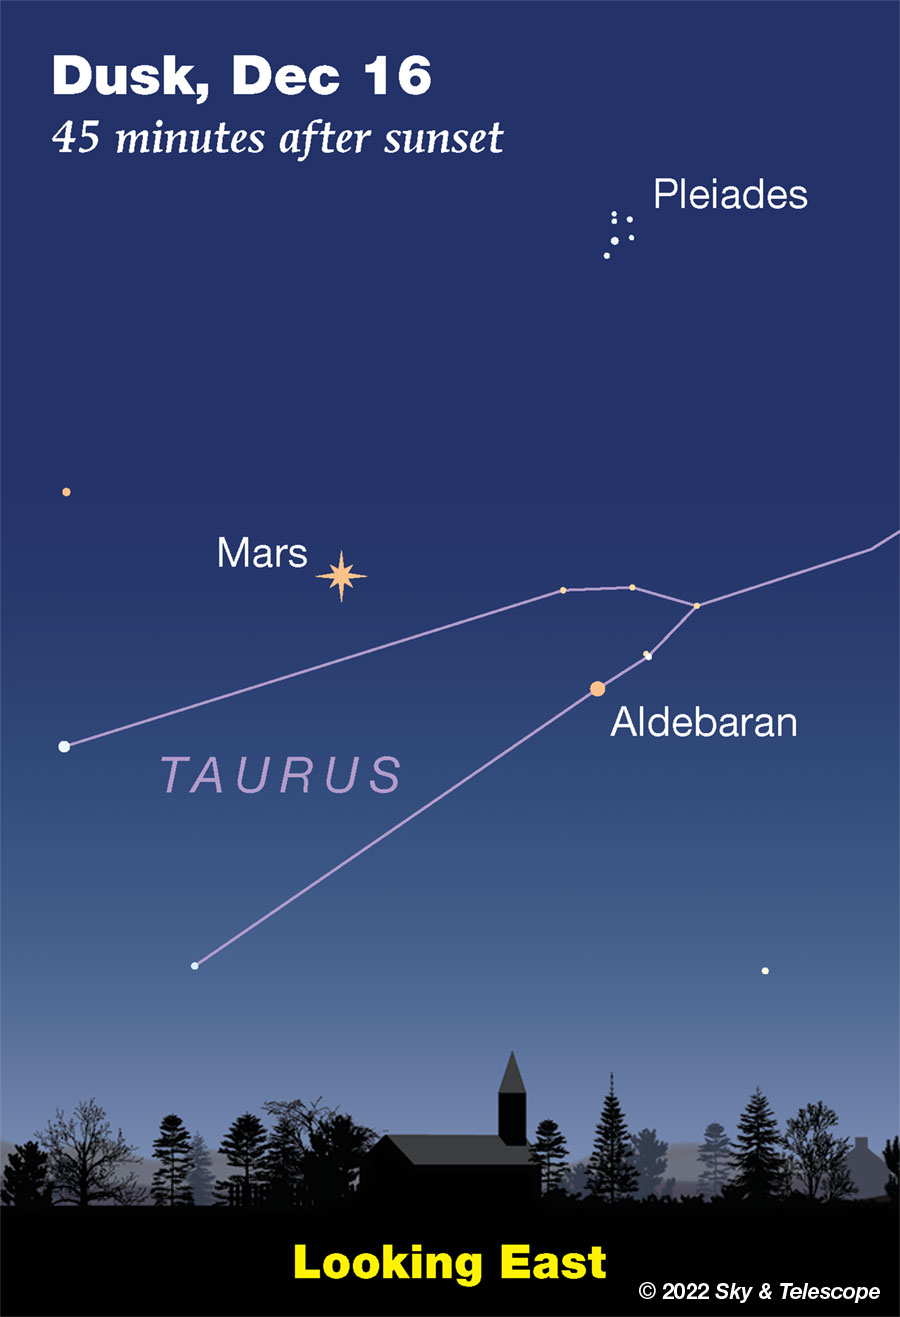 Mars, Aldebaran, and the Pleiades as seen on the evening of December 16, 2022 (Beethoven's birthday).